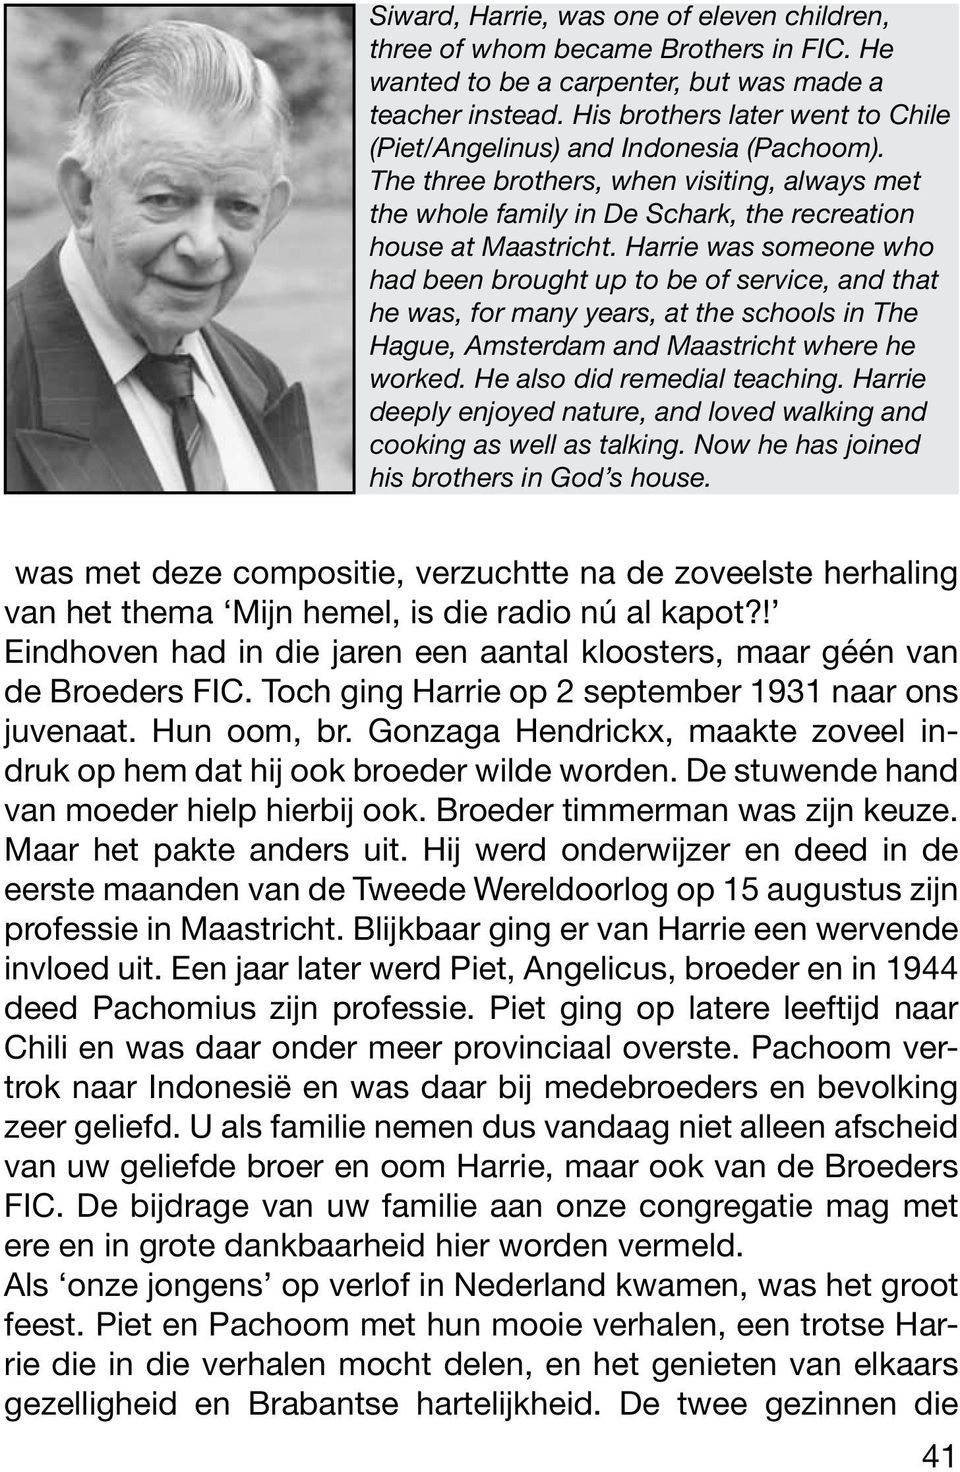 Harrie was someone who had been brought up to be of service, and that he was, for many years, at the schools in The Hague, Amsterdam and Maastricht where he worked. He also did remedial teaching.